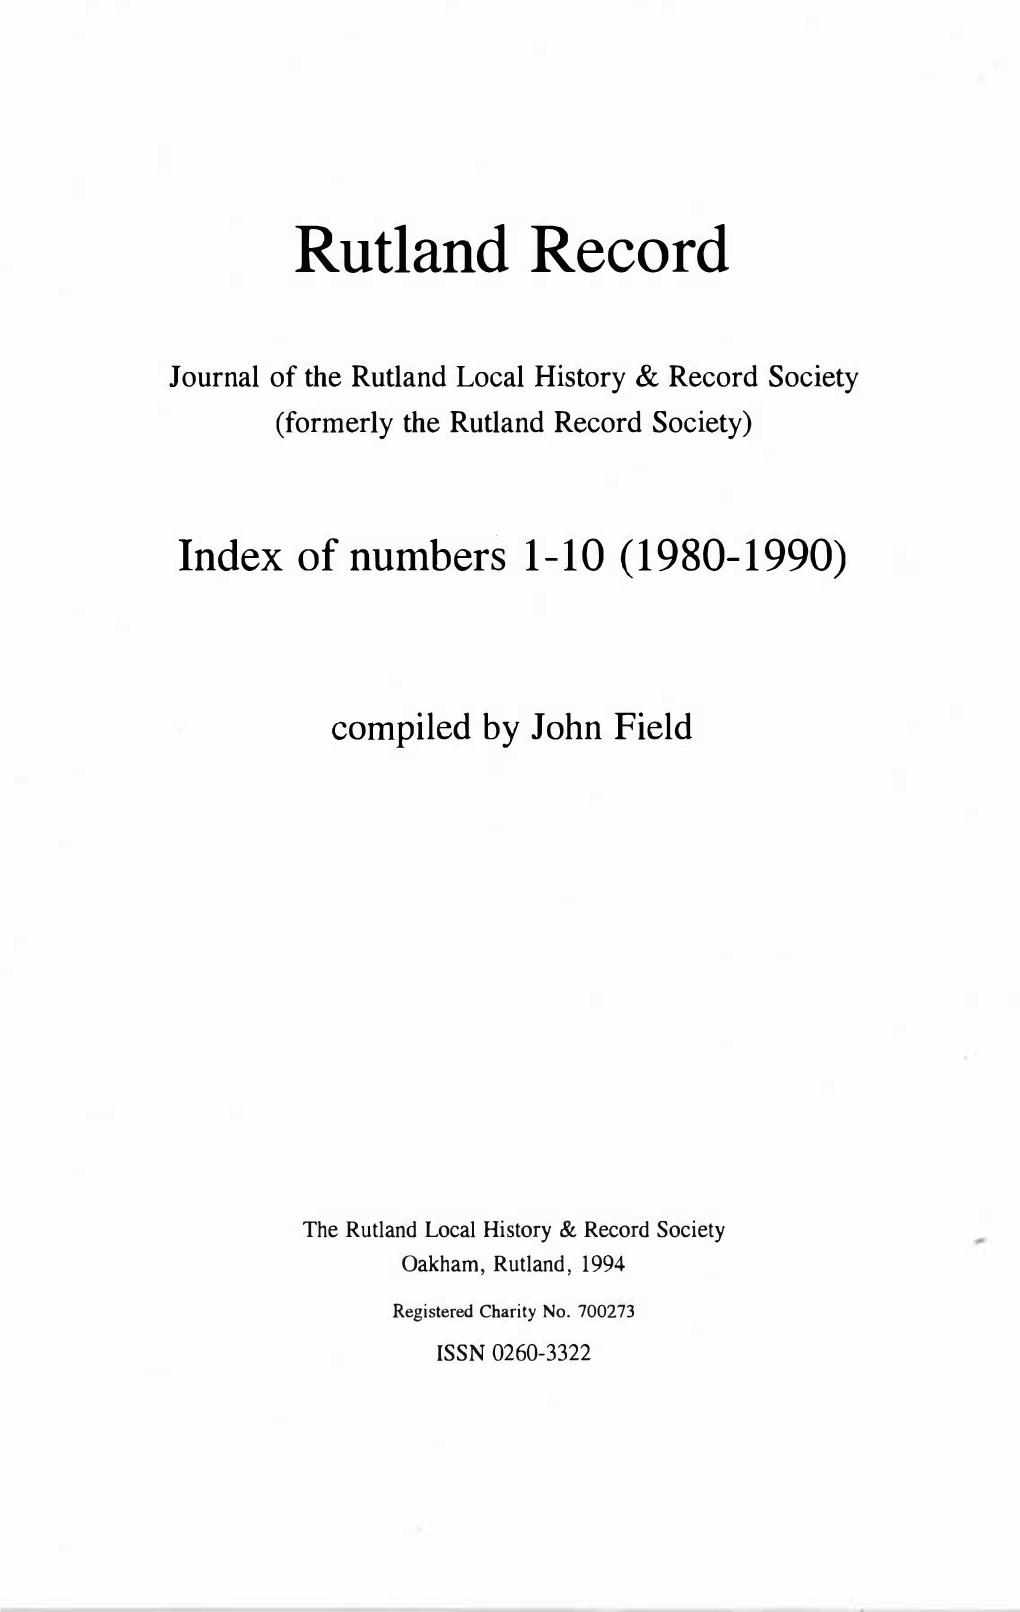 Index of Numbers 1-10 (1980-1990)